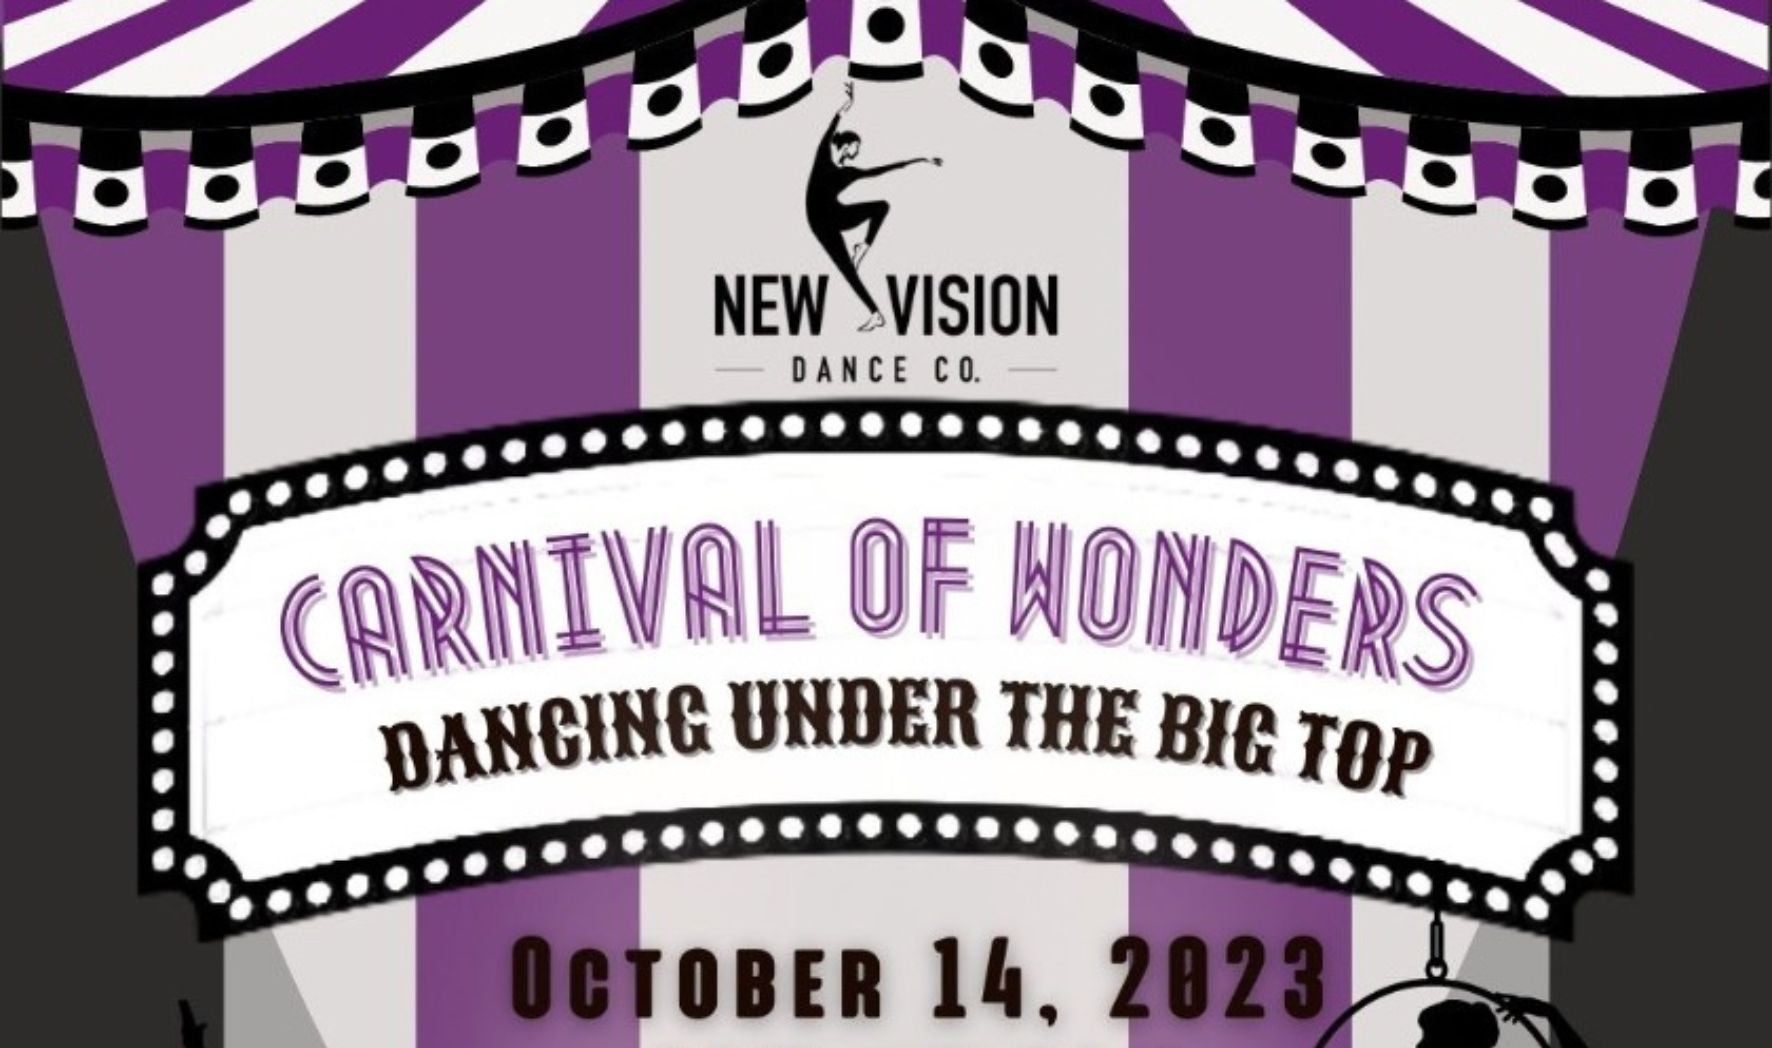 More Info for Carnival of Wonders - Dancing Under the Big Top